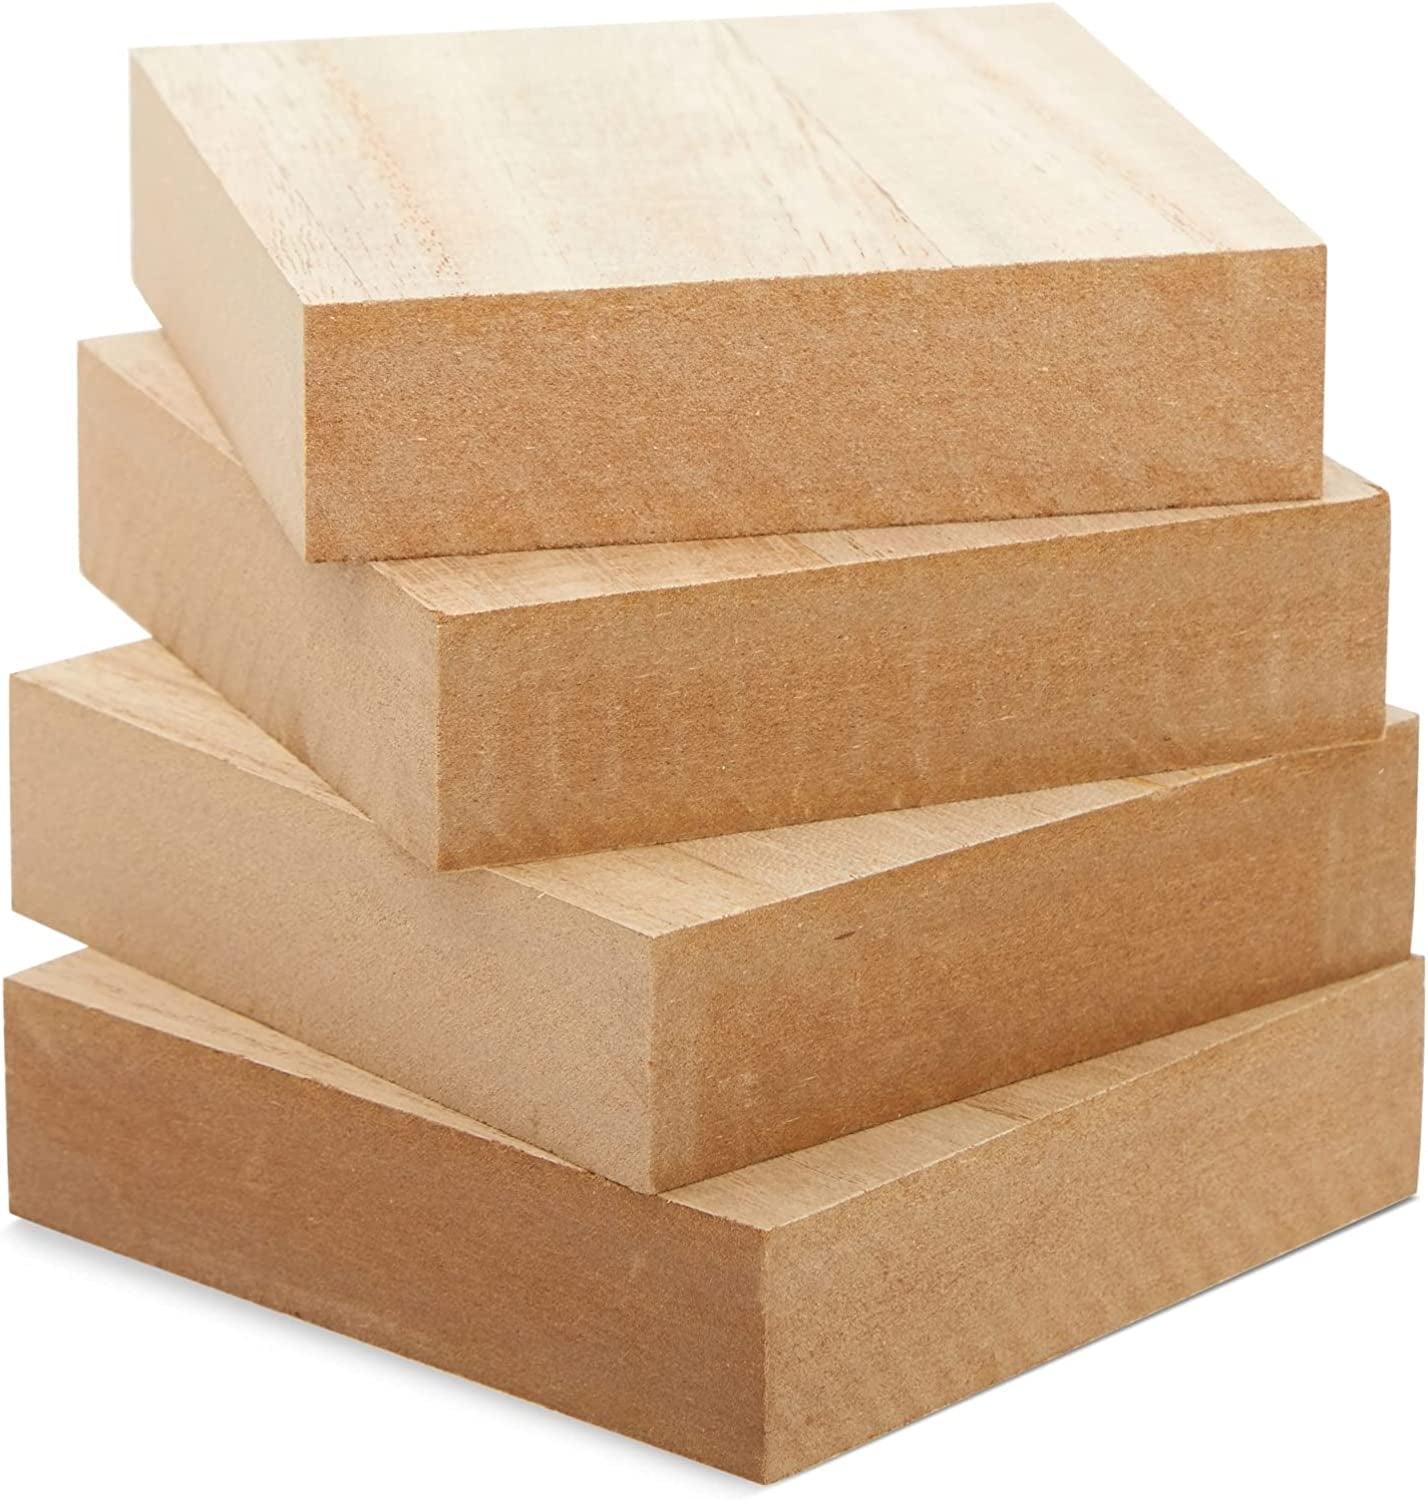 Unfinished MDF Wood Blocks for Crafts, 1 In Thick Wooden Square Blocks (4x4  In, 4 Pack)